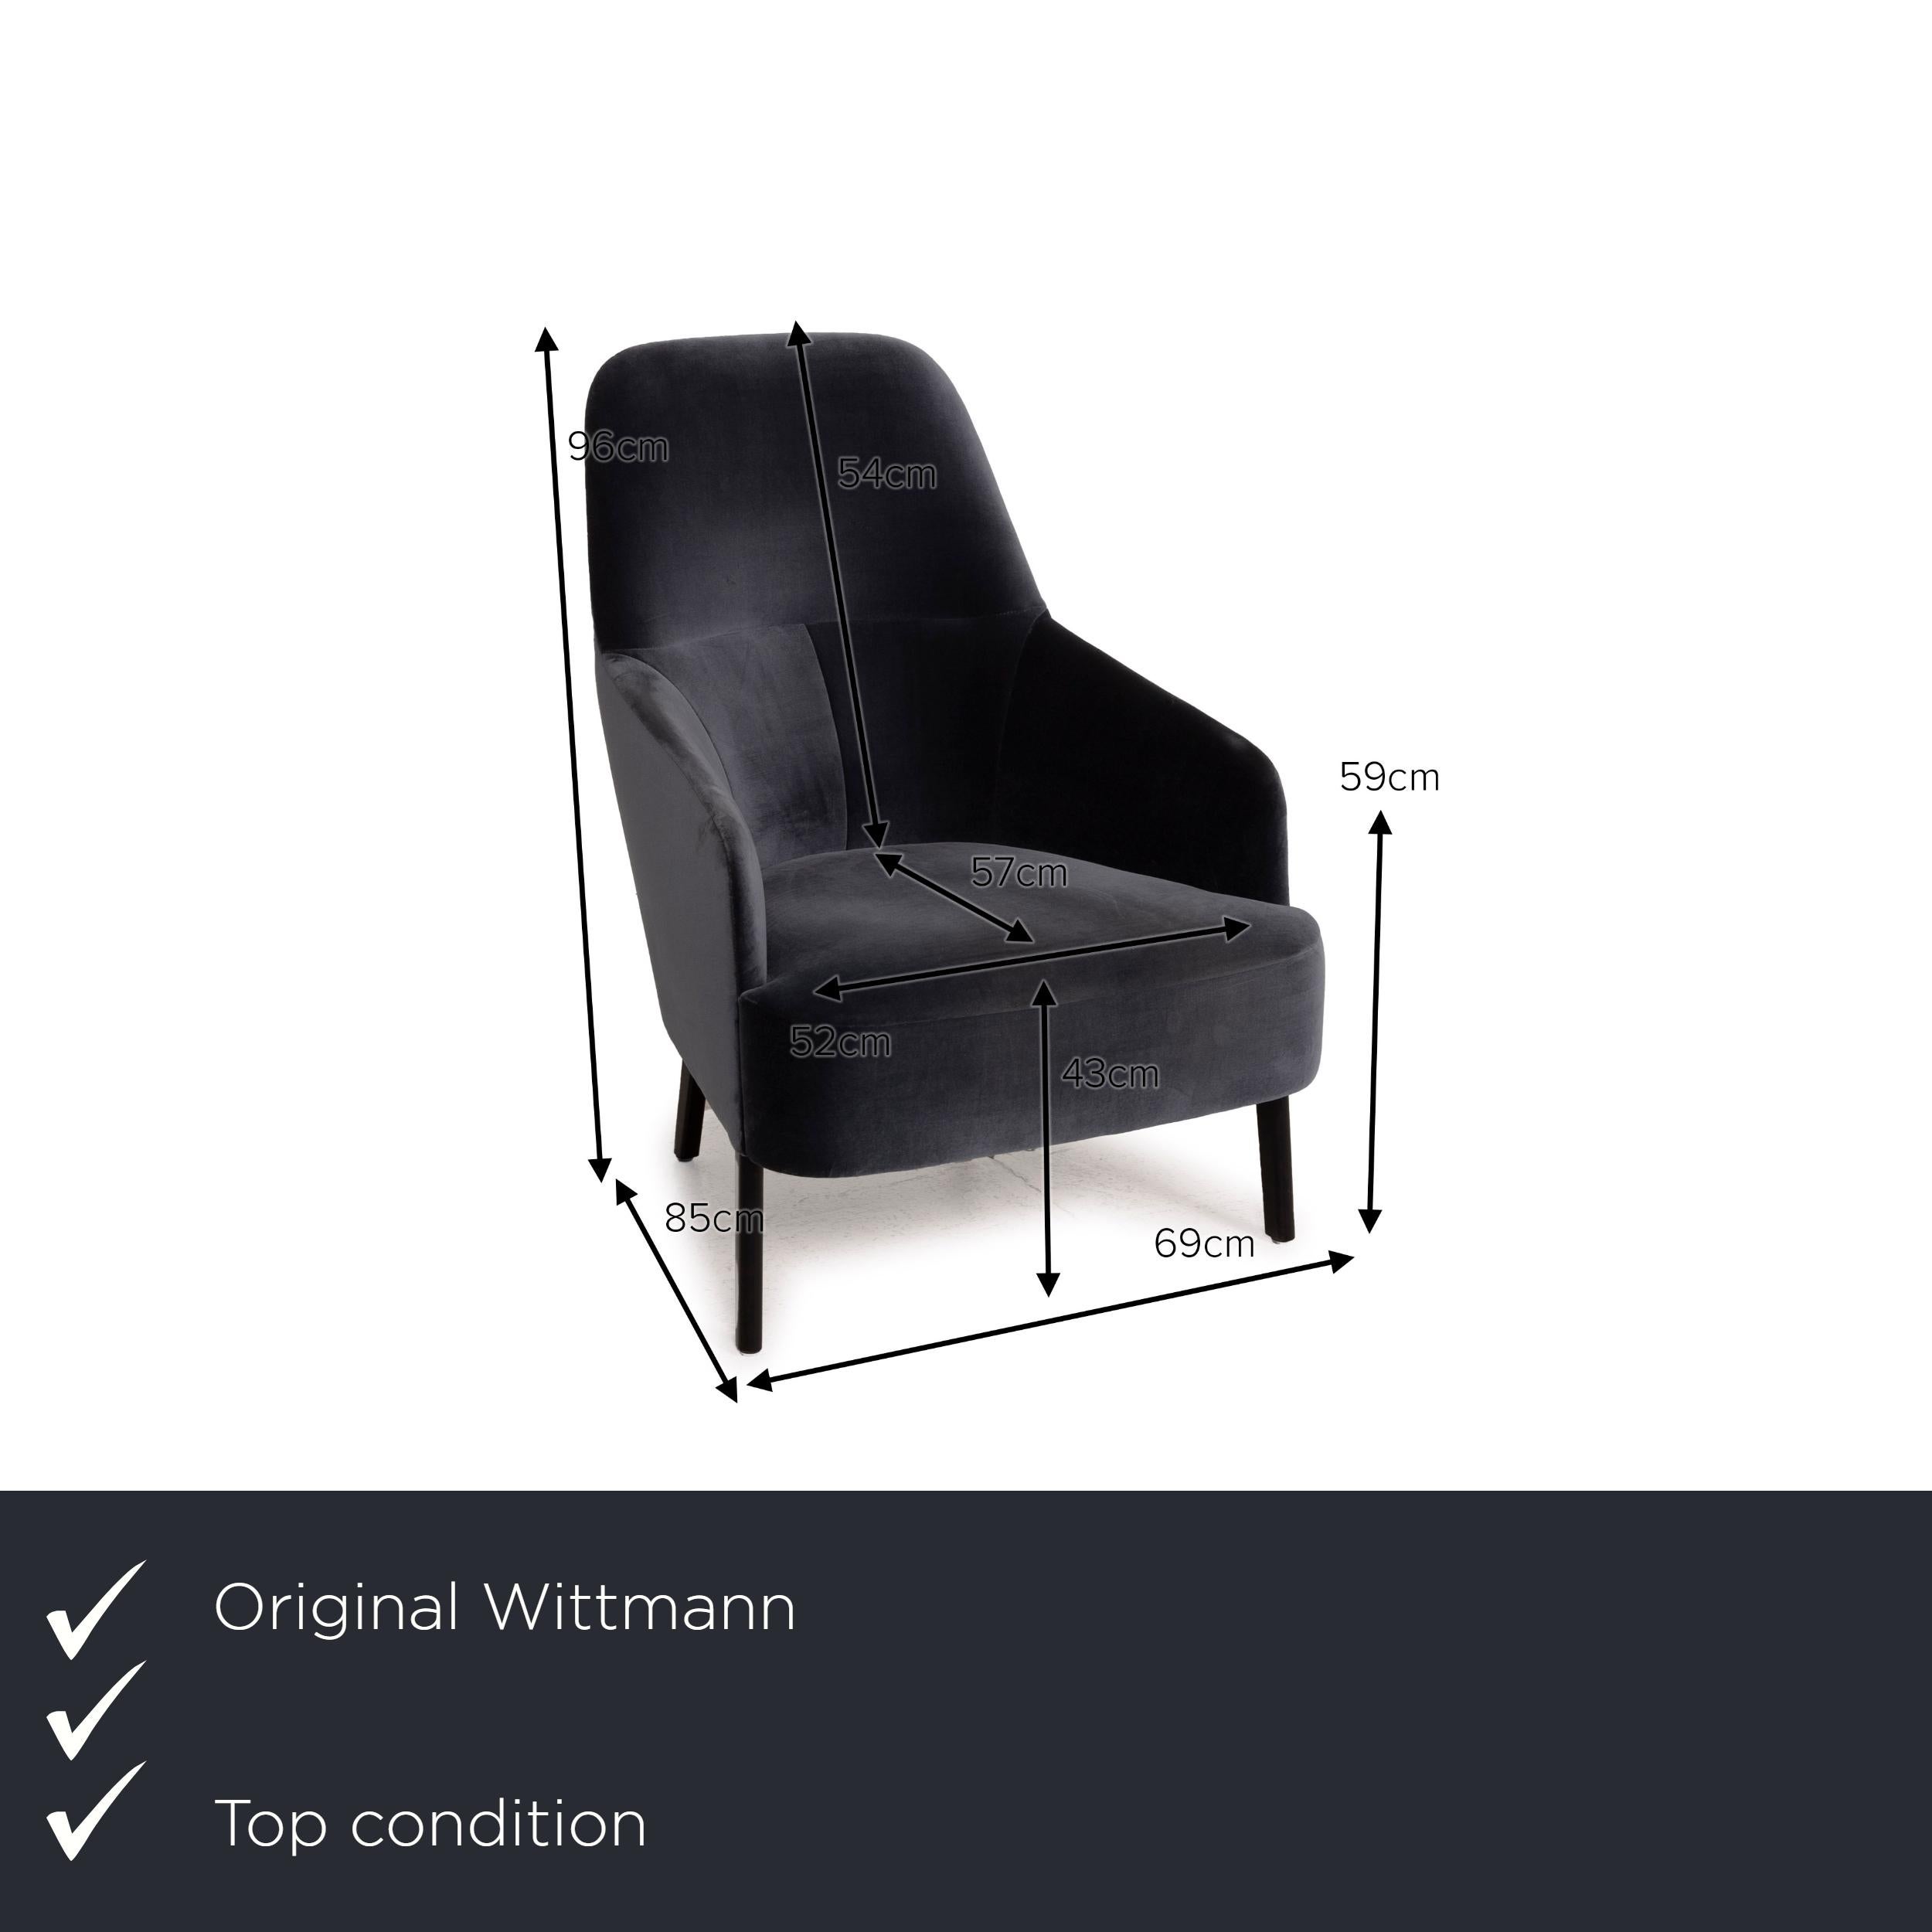 We present to you a Wittmann Mono fabric armchair dark blue gray.
  
 

 Product measurements in centimeters:
 

 depth: 85
 width: 69
 height: 96
 seat height: 43
 rest height: 59
 seat depth: 57
 seat width: 52
 back height: 54.